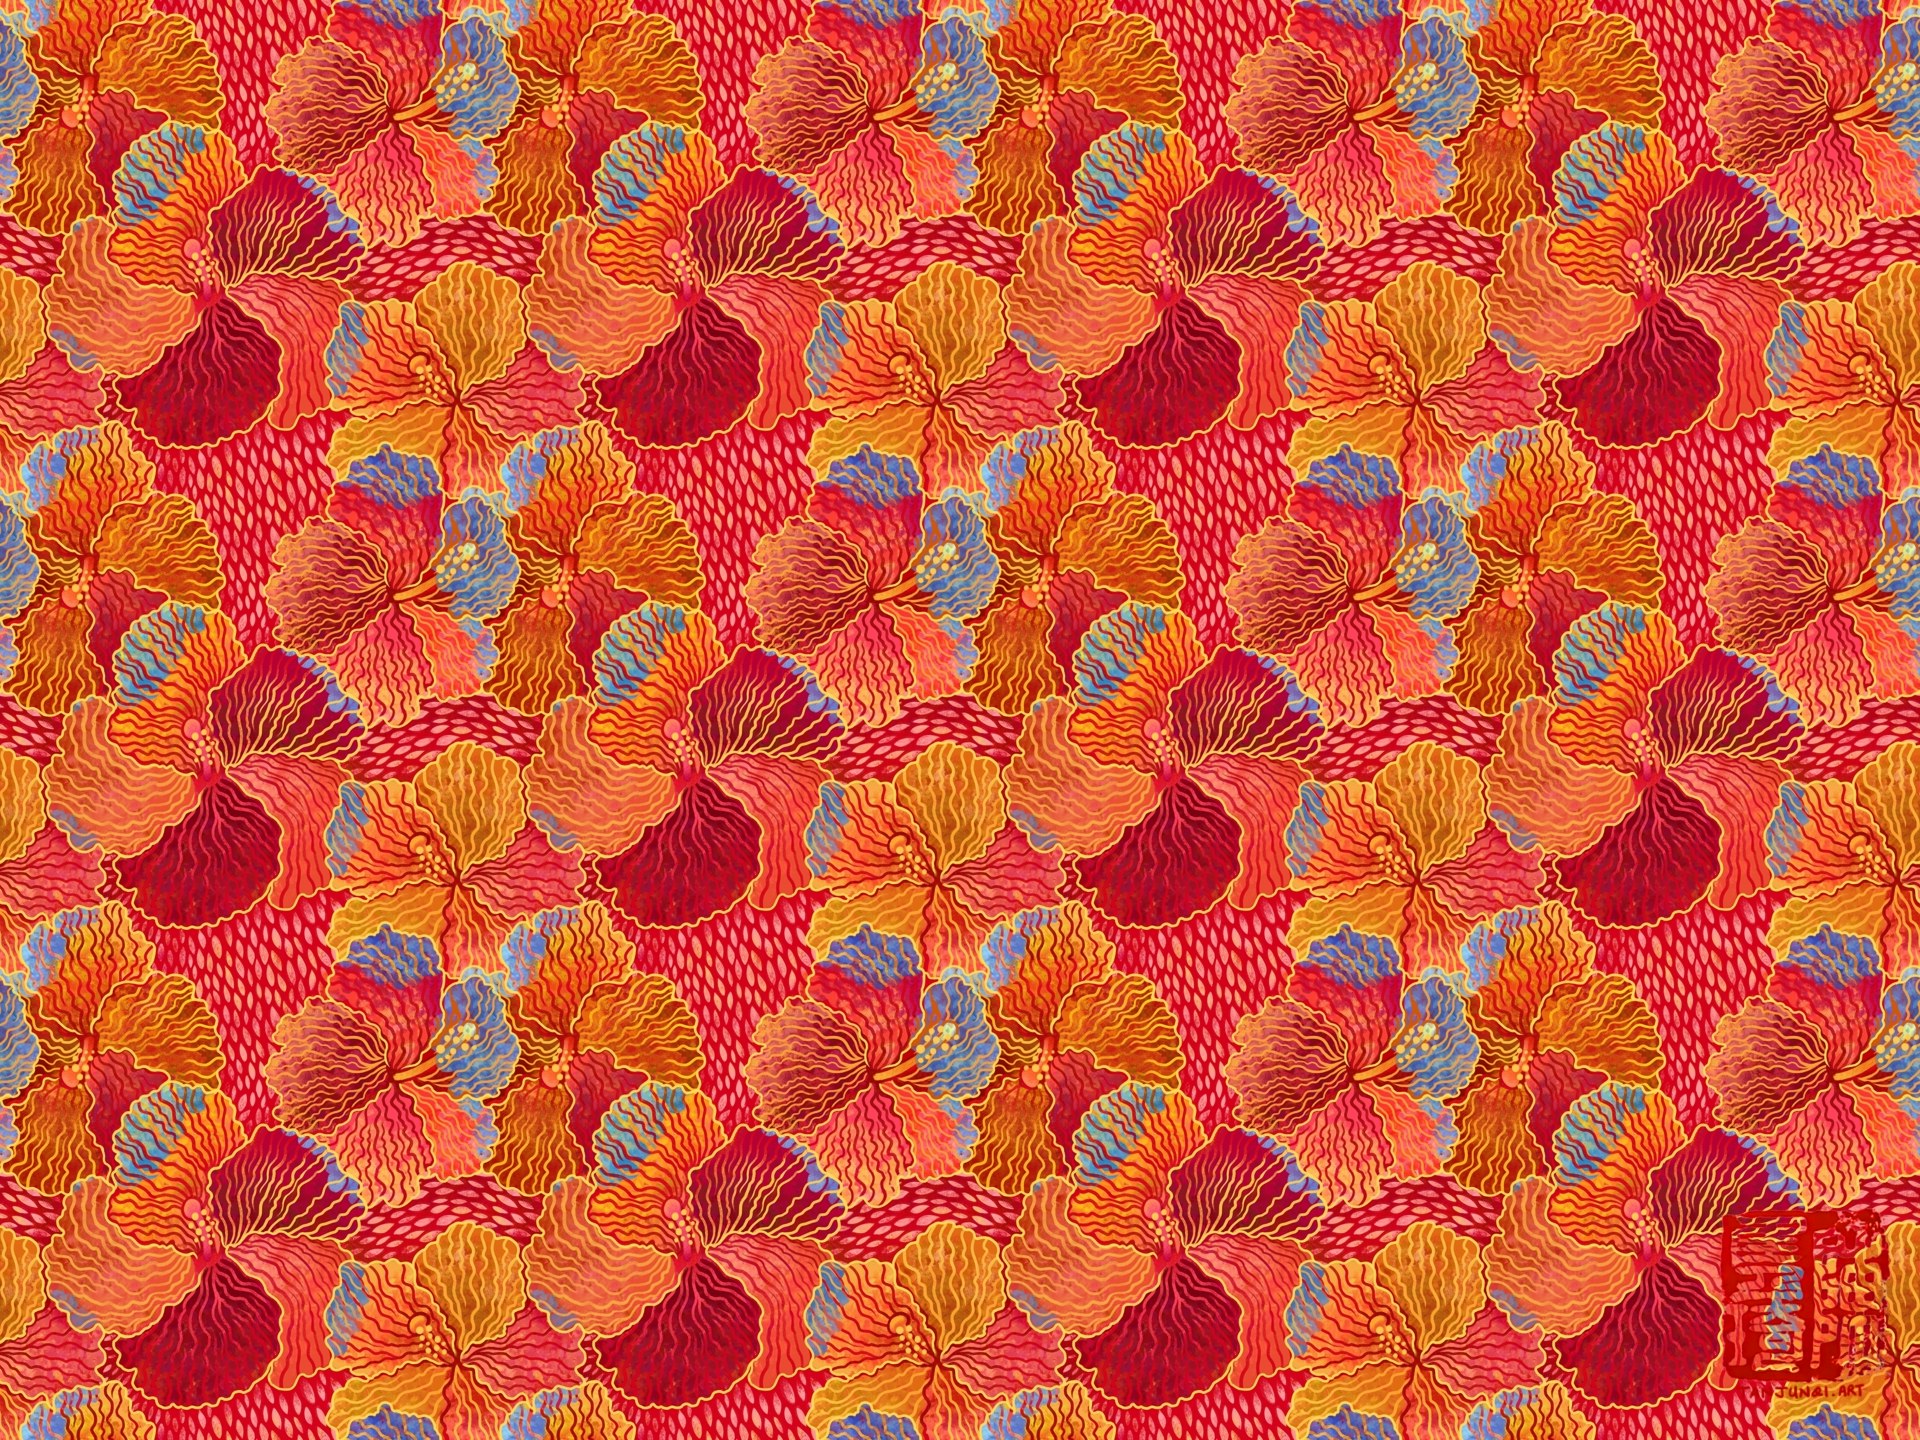 Digitally painted floral design of overlapping red hibiscuses, done in a slightly graphic and textured style inspired by batik and Chinese papercuts. The hibiscus are different hues of red and magenta, while the outlines are golden, and their overlapping parts are blue, against a background with a light pink pattern. The design is tiled across a larger area